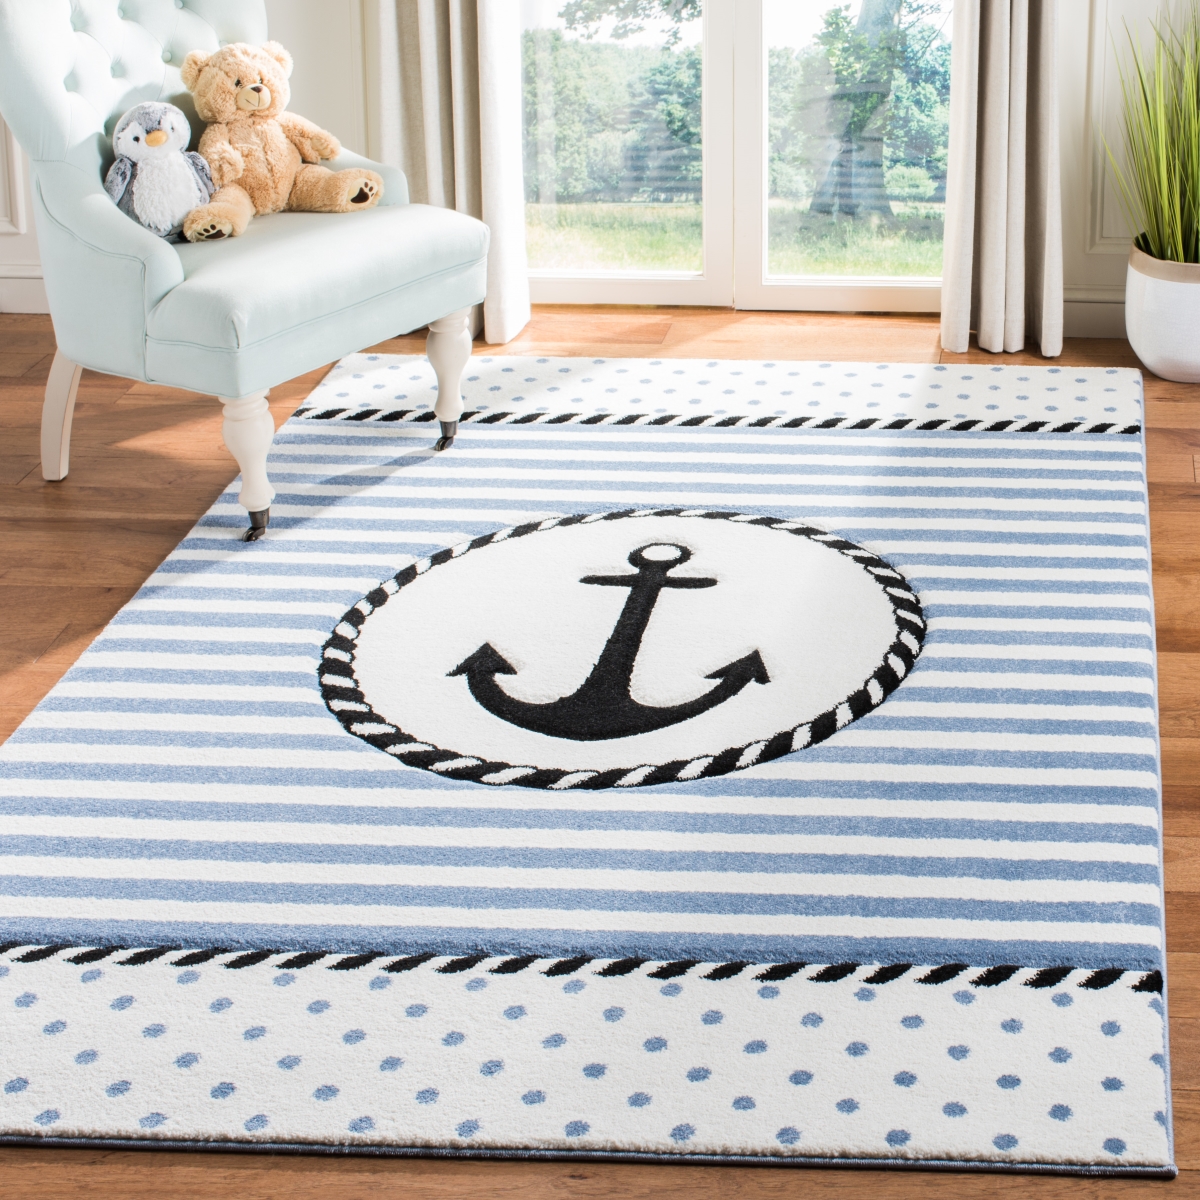 Crk124a-5 5 Ft. 3 In. X 7 Ft. 6 In. Carousel Kids Rectangle Power Loomed Area Rug, Ivory & Navy